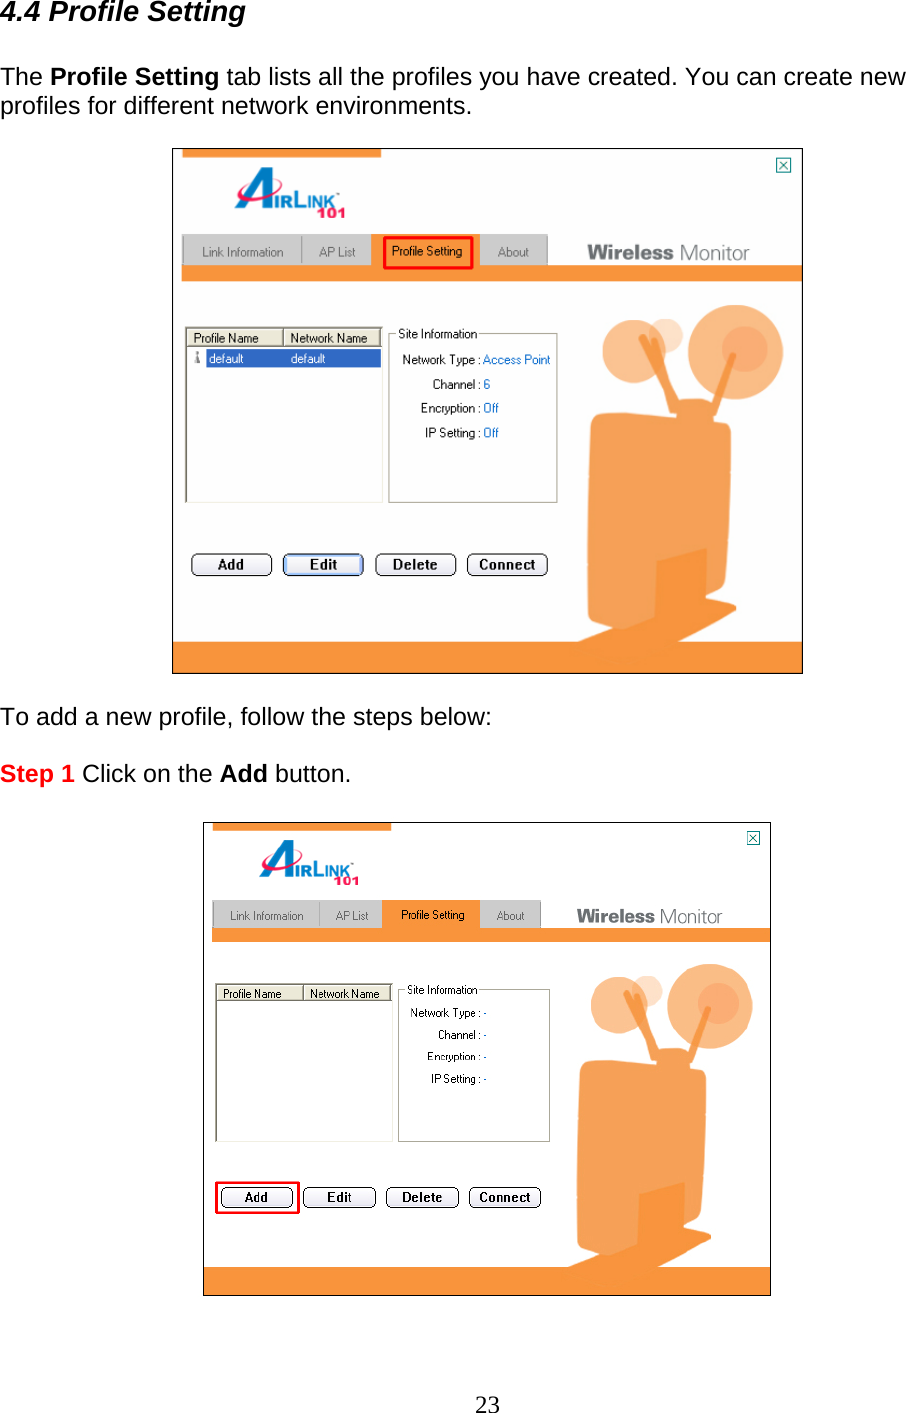 23 4.4 Profile Setting  The Profile Setting tab lists all the profiles you have created. You can create new profiles for different network environments.    To add a new profile, follow the steps below:  Step 1 Click on the Add button.    